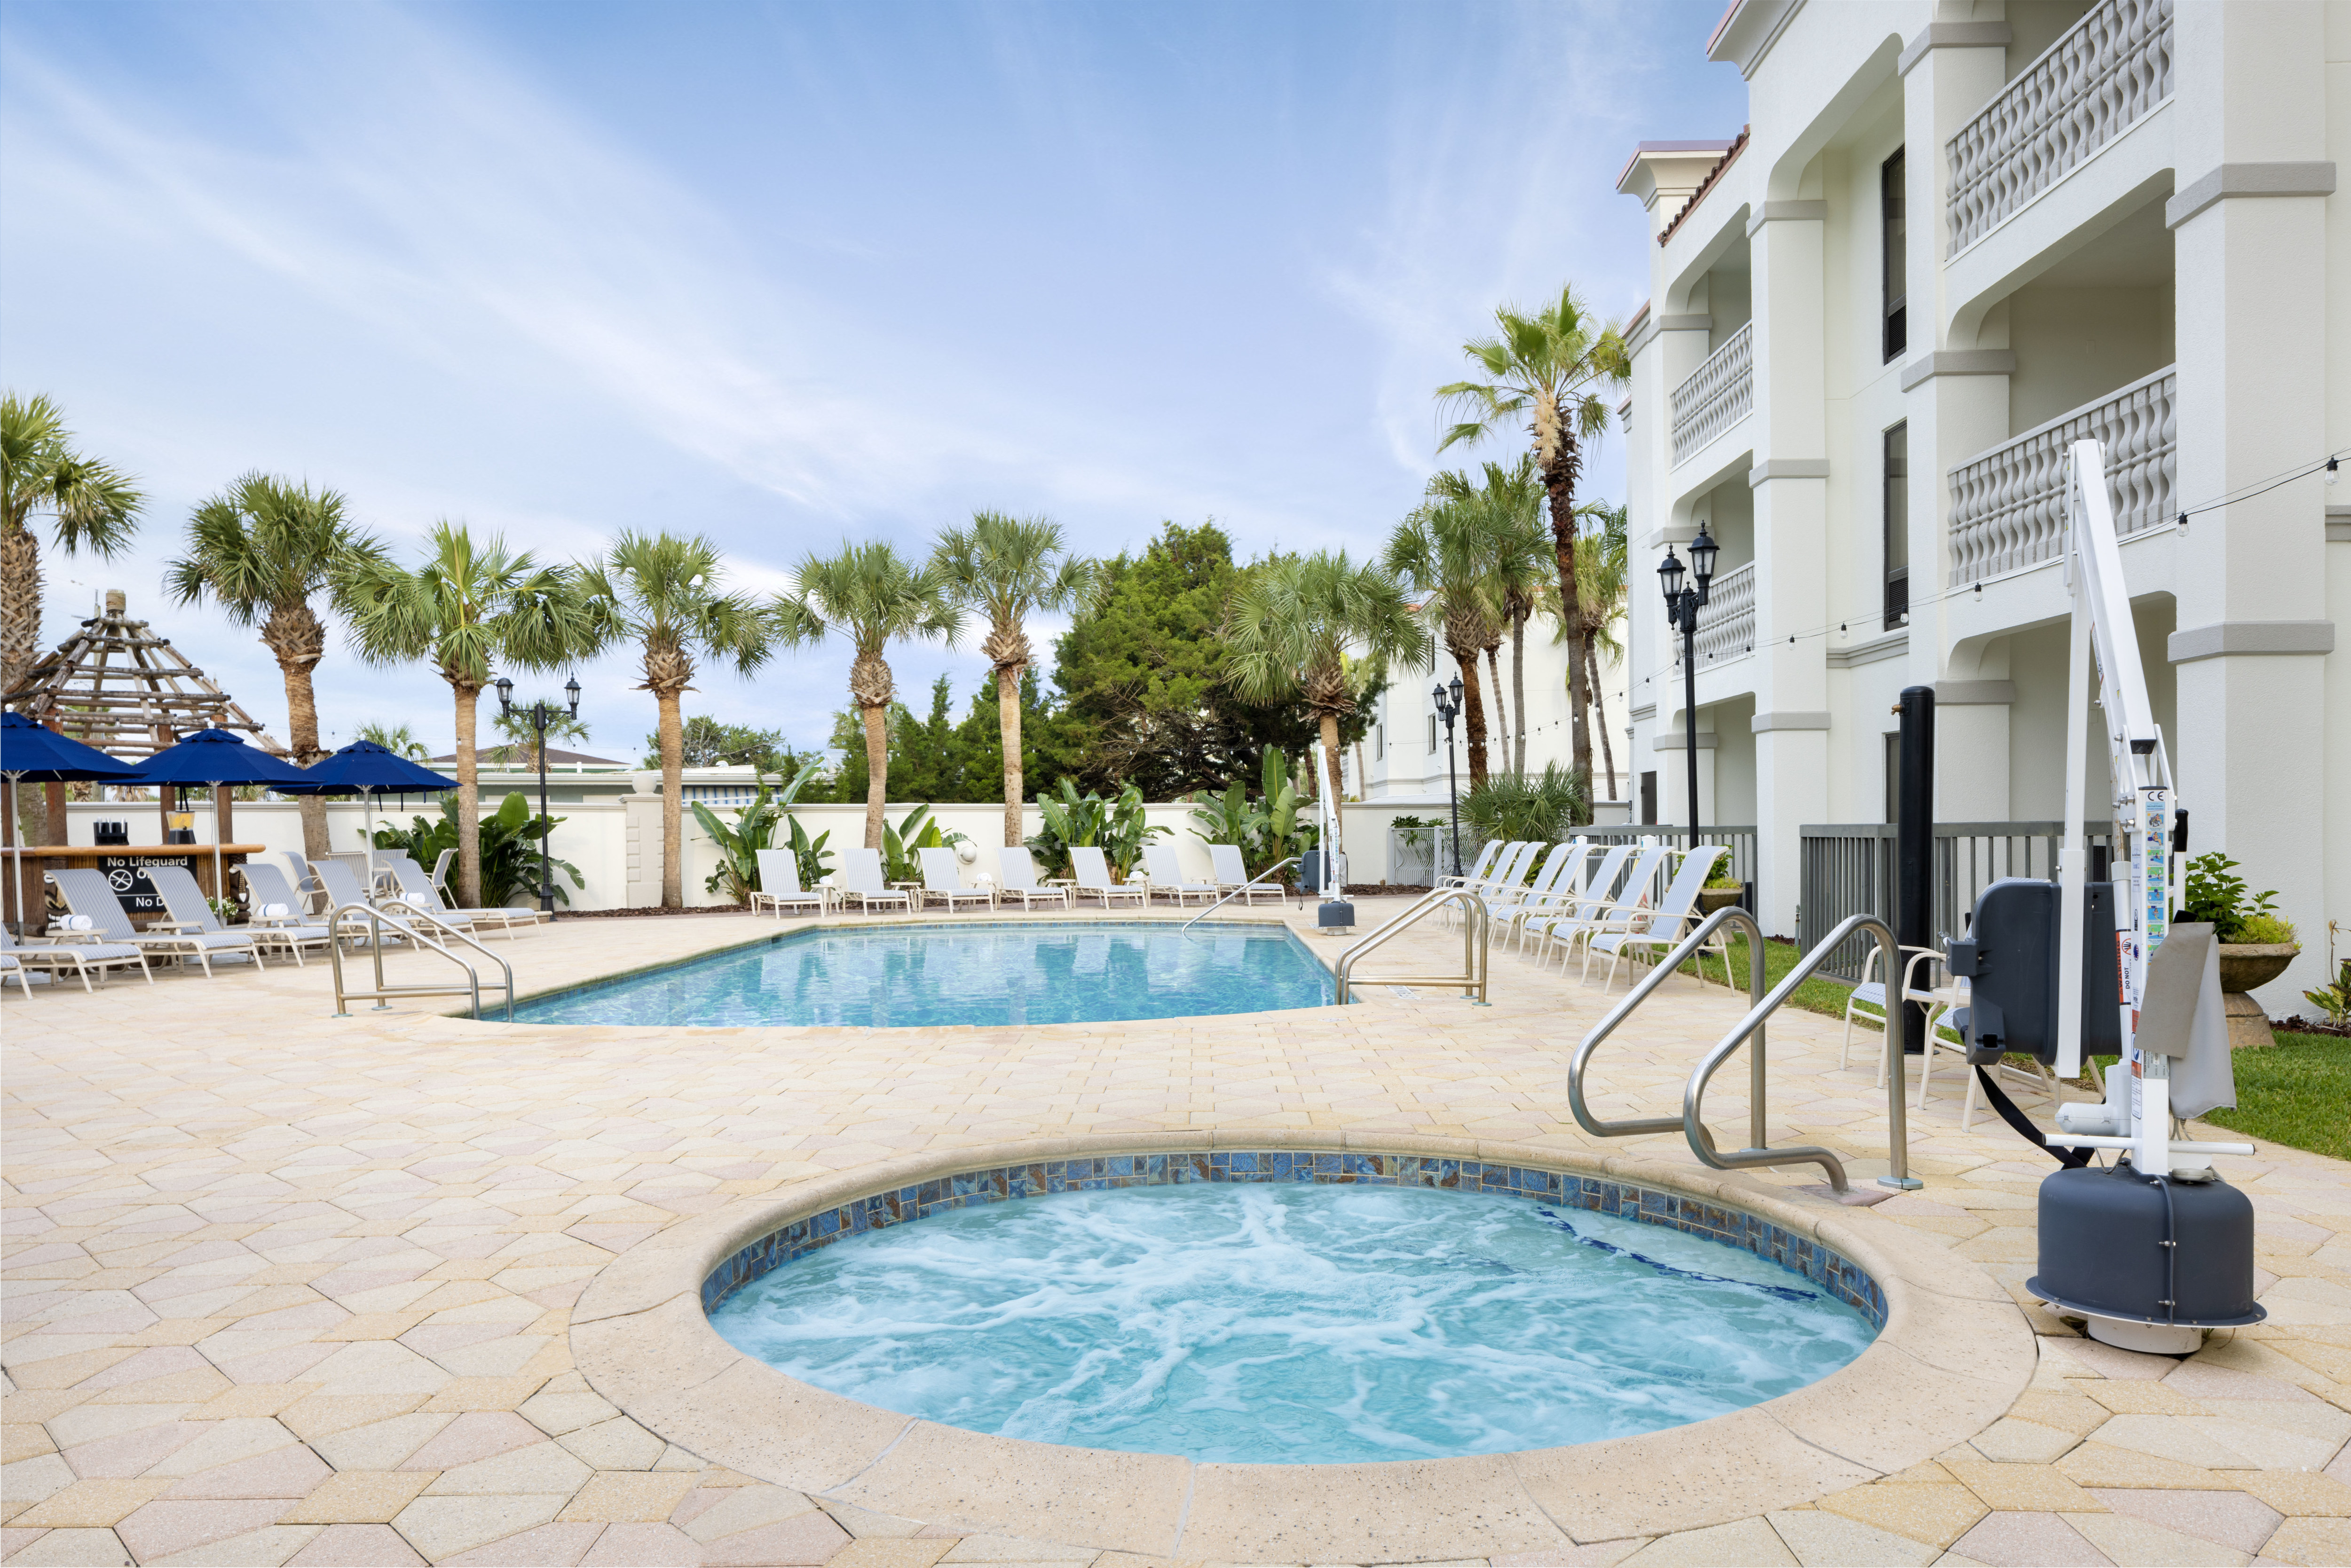 outdoor pool and hot tub, lounge chairs, palm trees, accessible lift